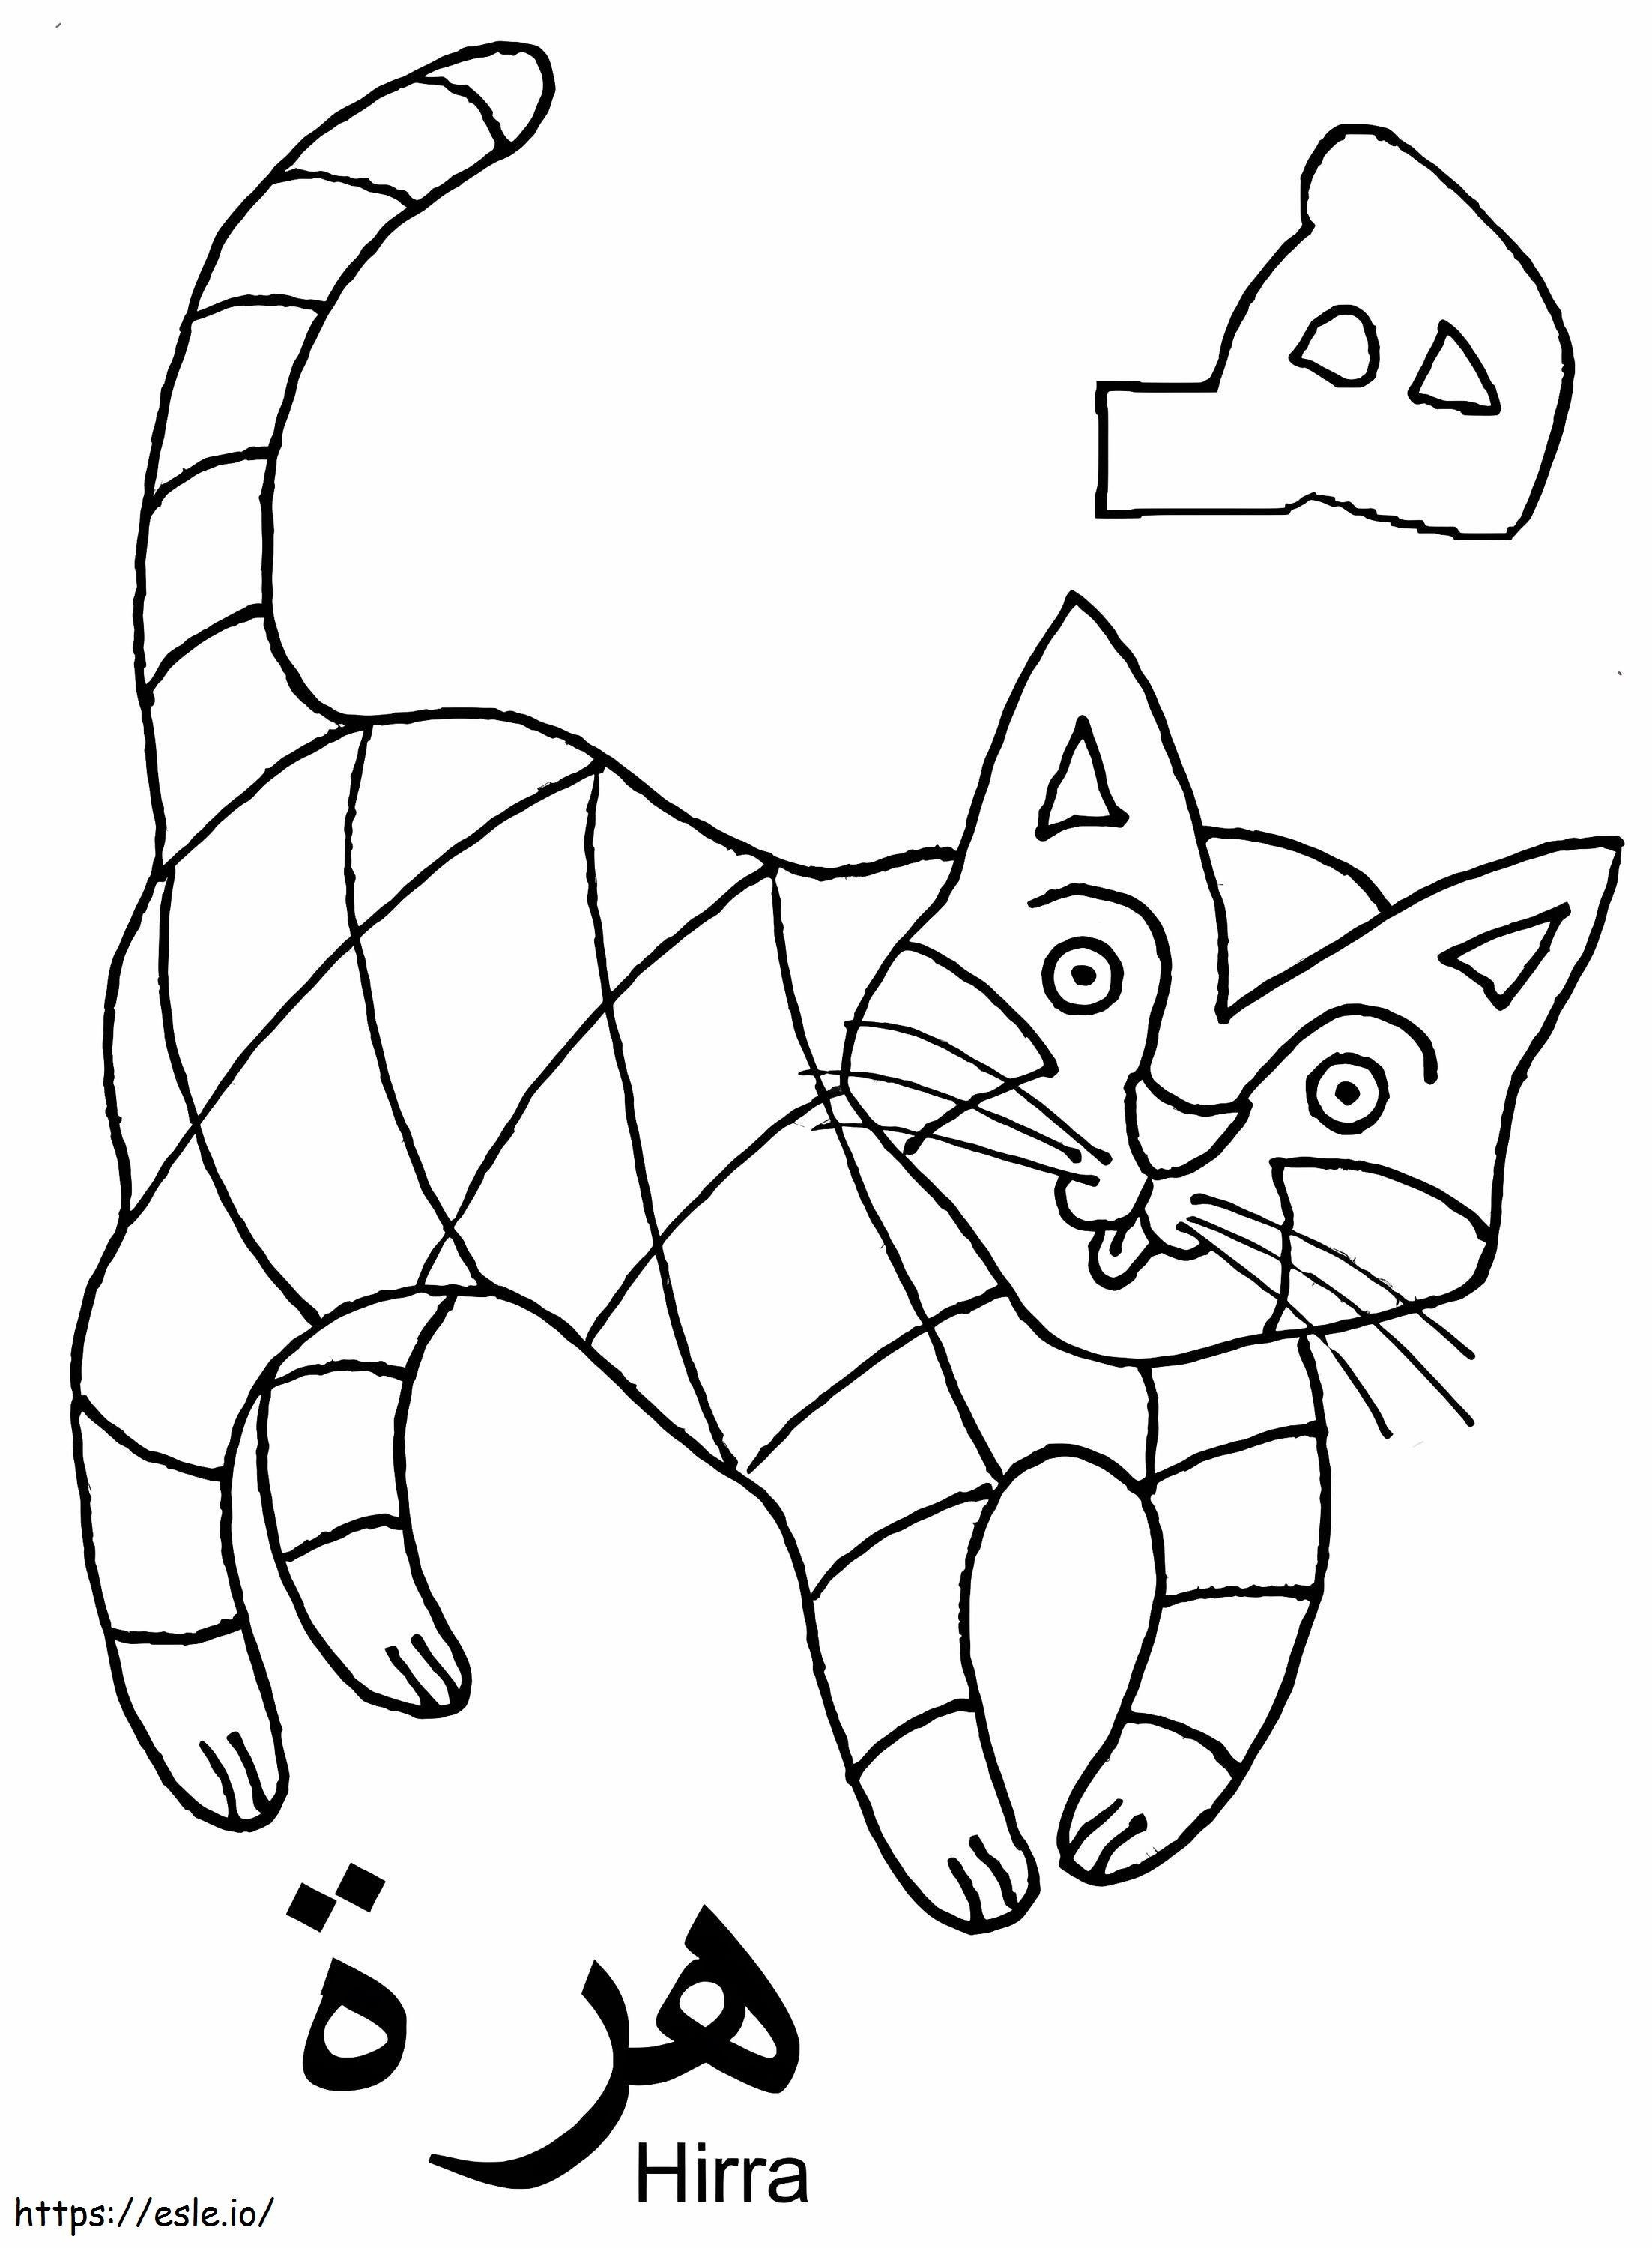 The Arabic Alphabet coloring page